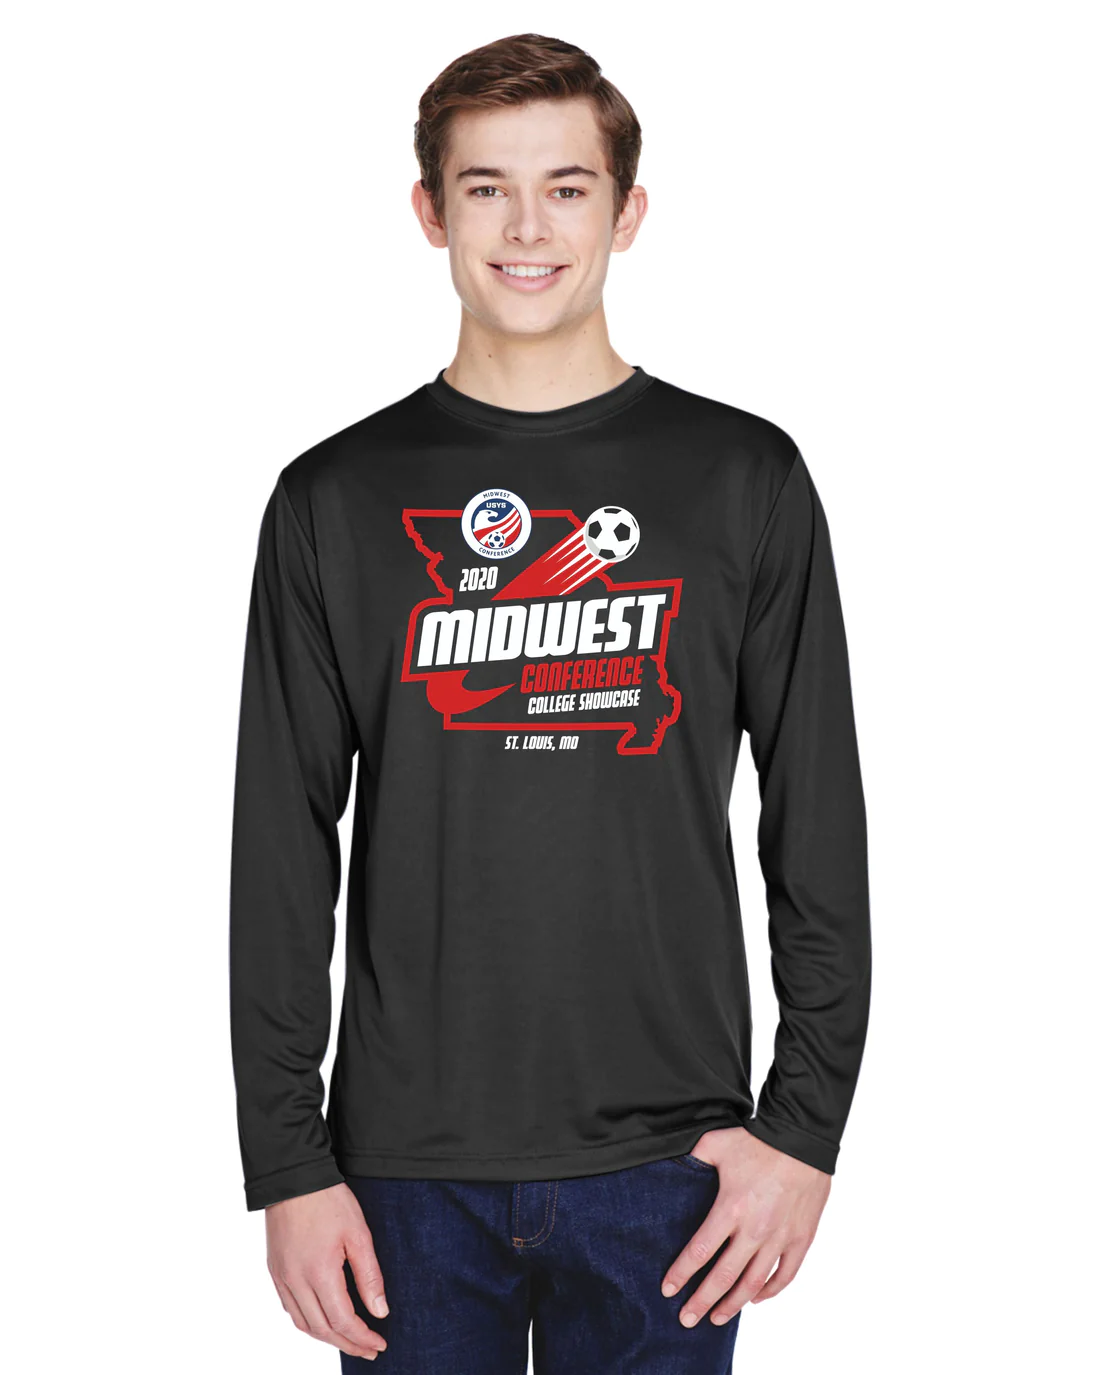 2020 Midwest Conference - Long Sleeve